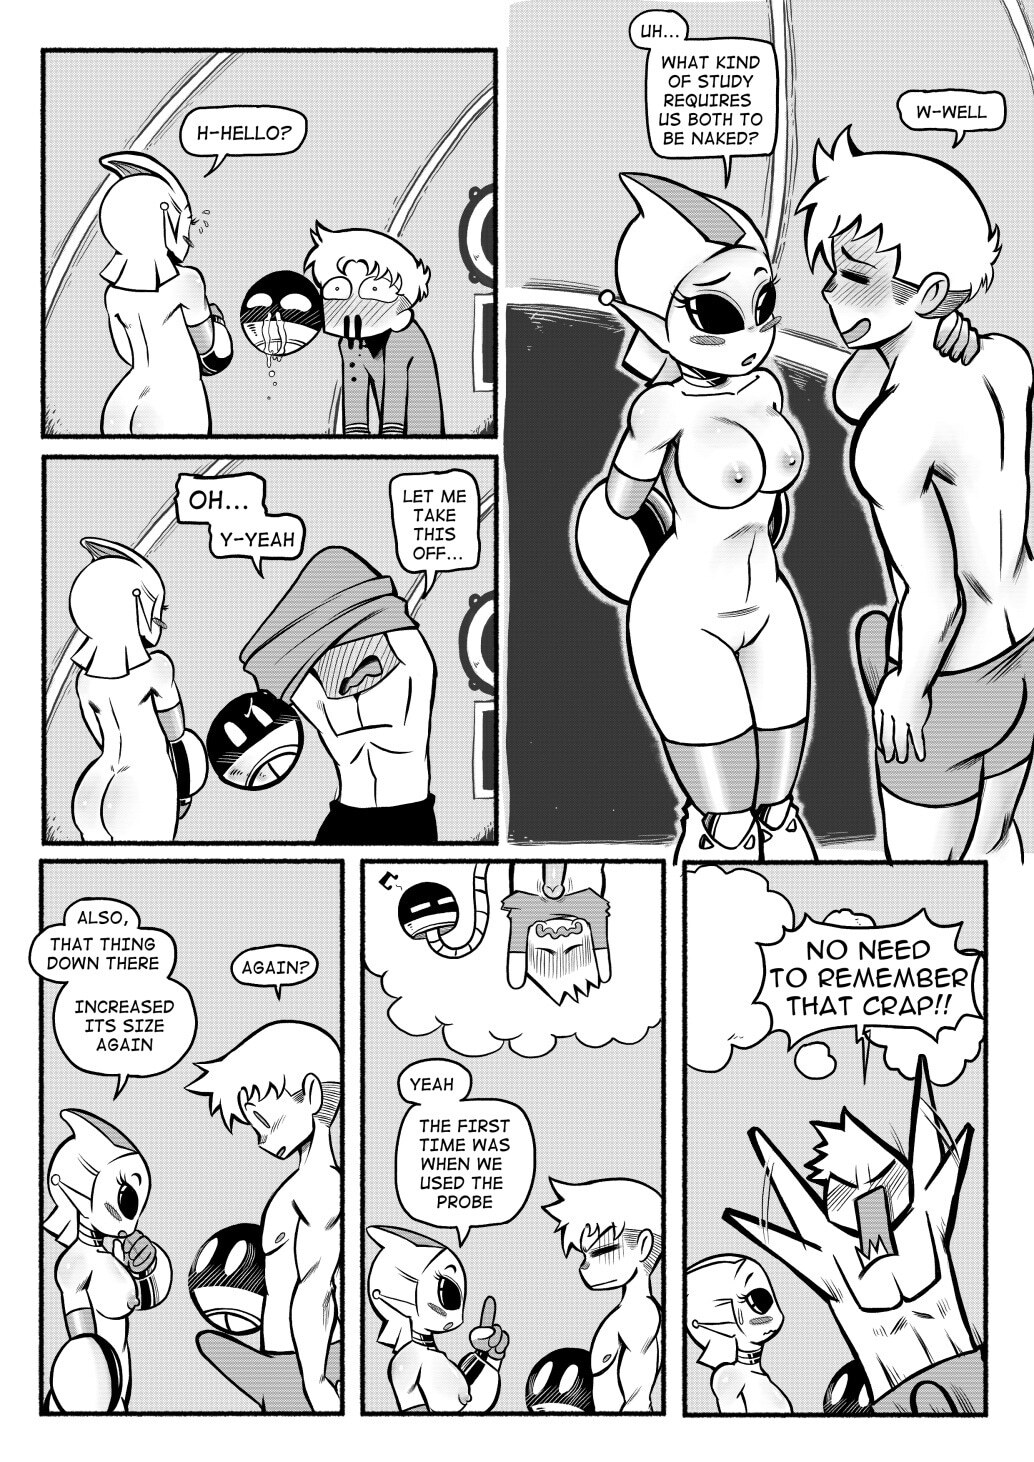 Abducted! - Mr.E - Page 13